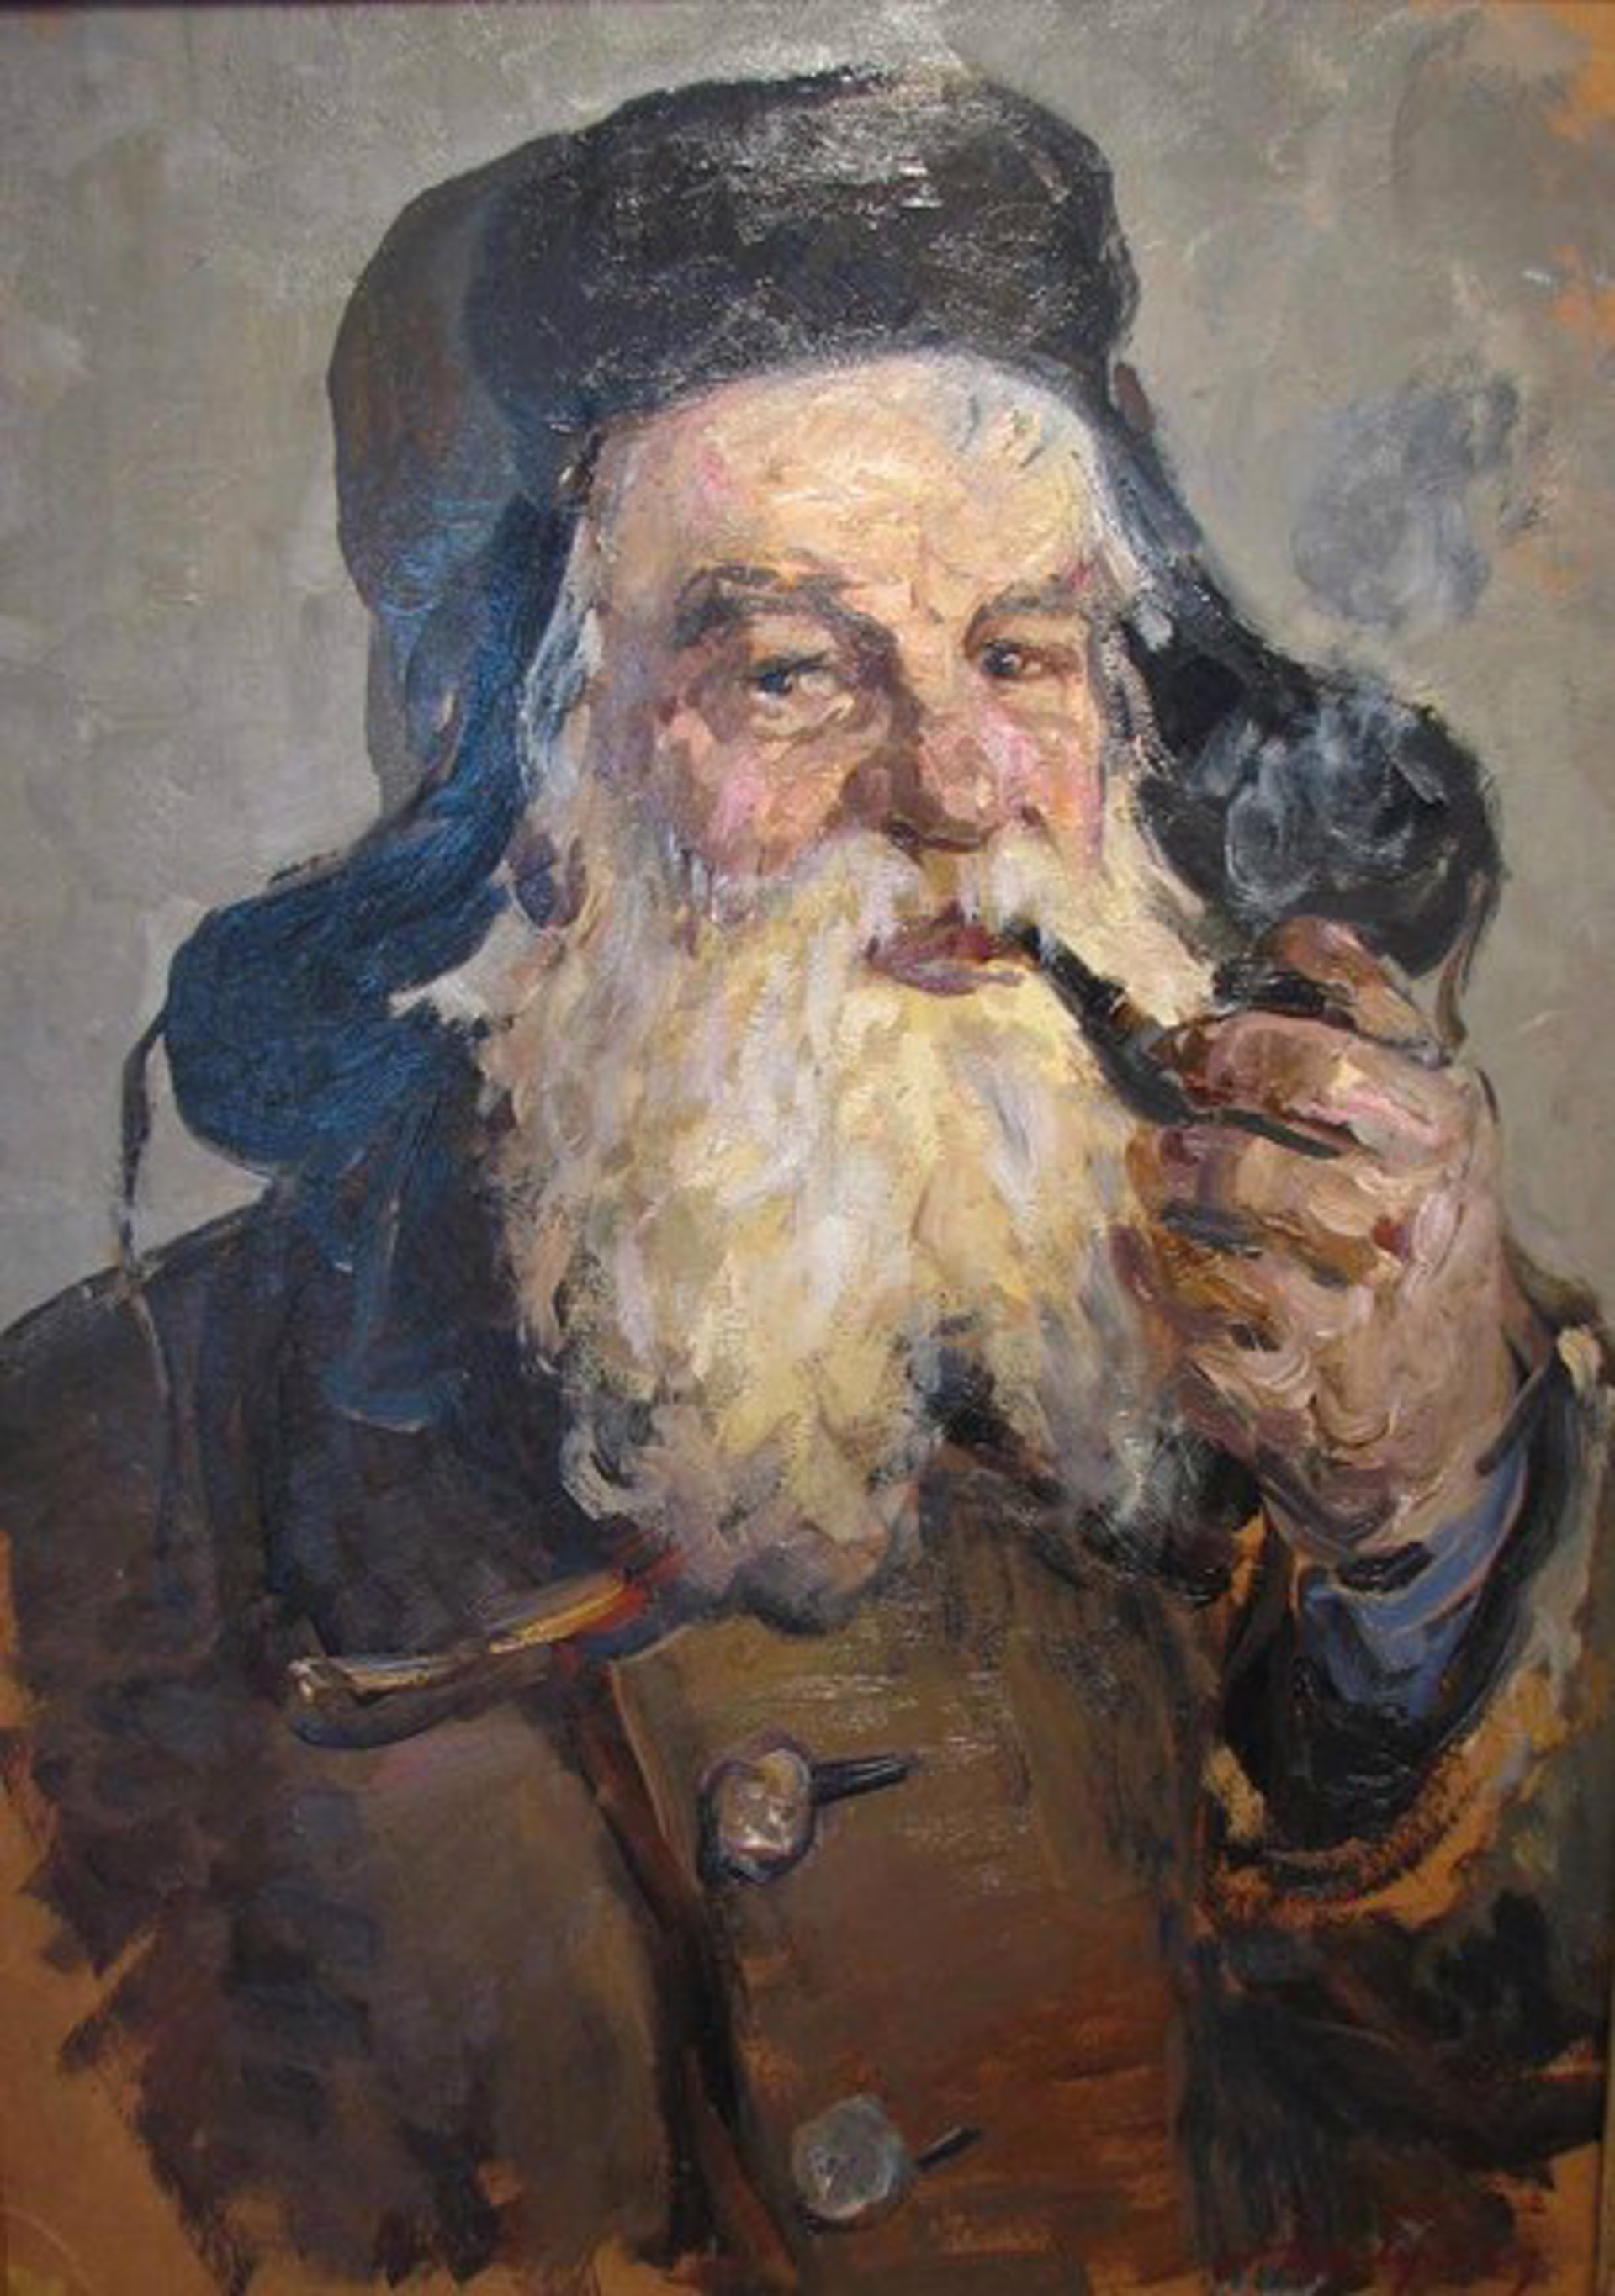 Fisherman with Pipe by Mikhail Grachev